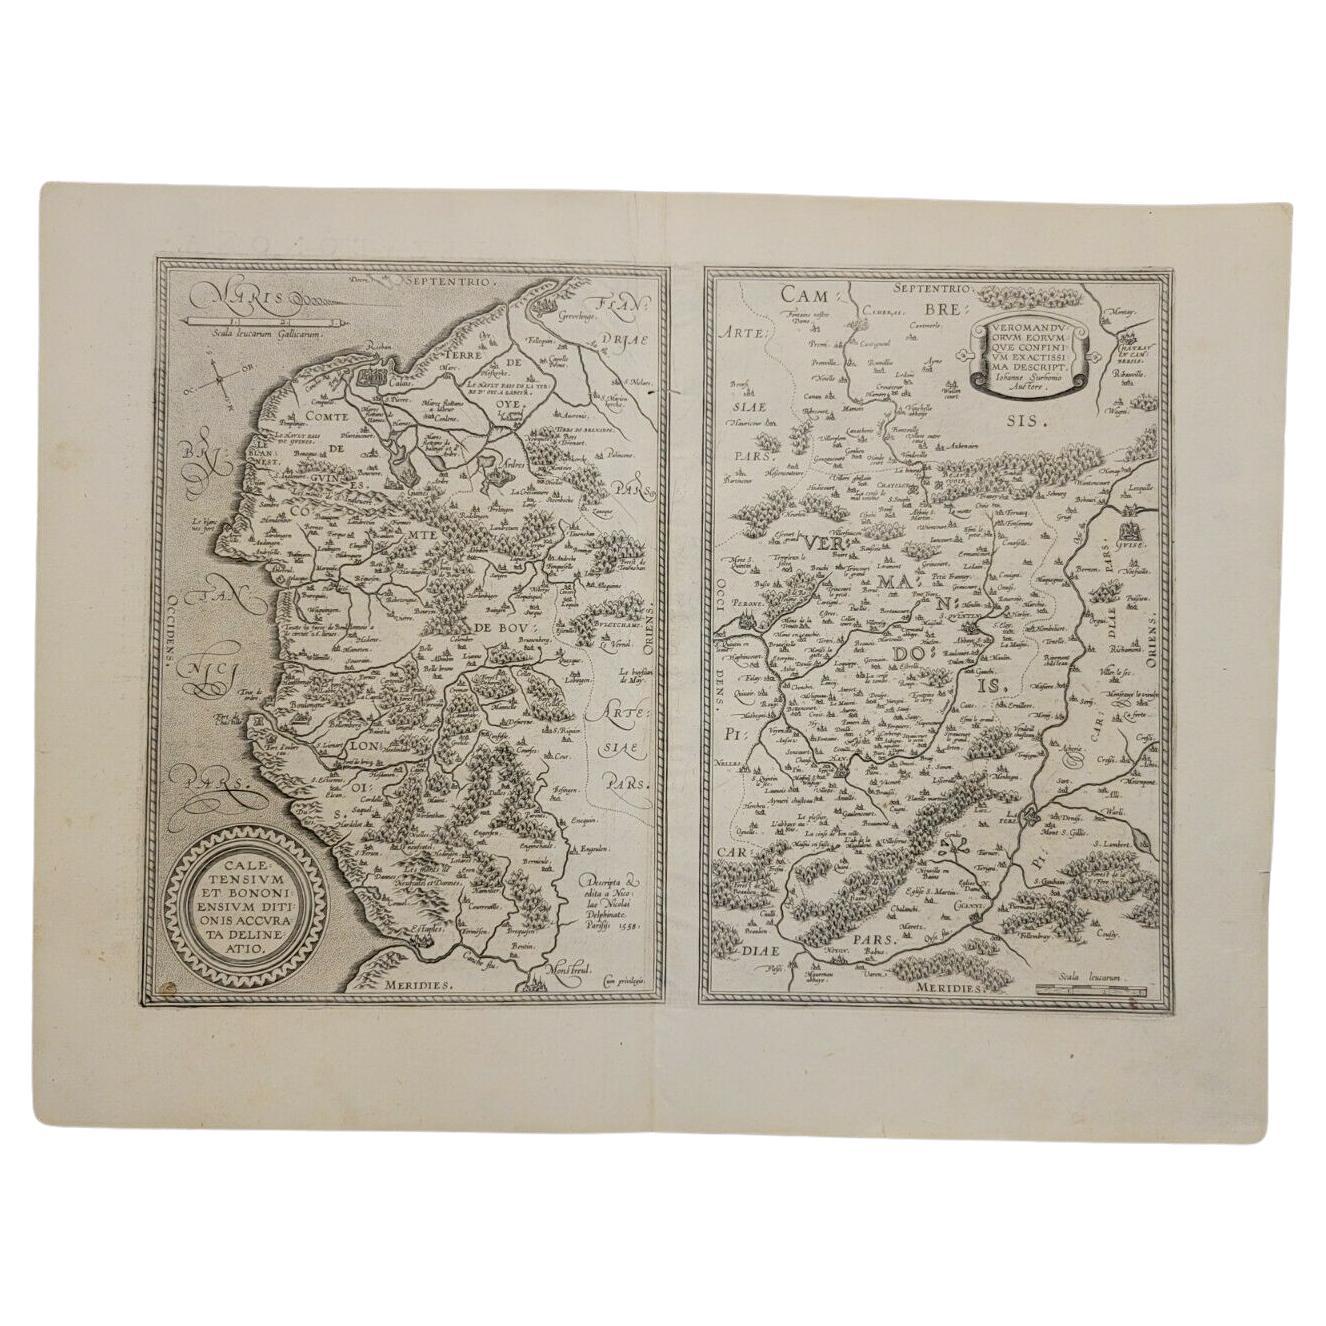 1590 Ortelius Map of Calais and Vermandois, France and Vicinity Ric.a014 For Sale